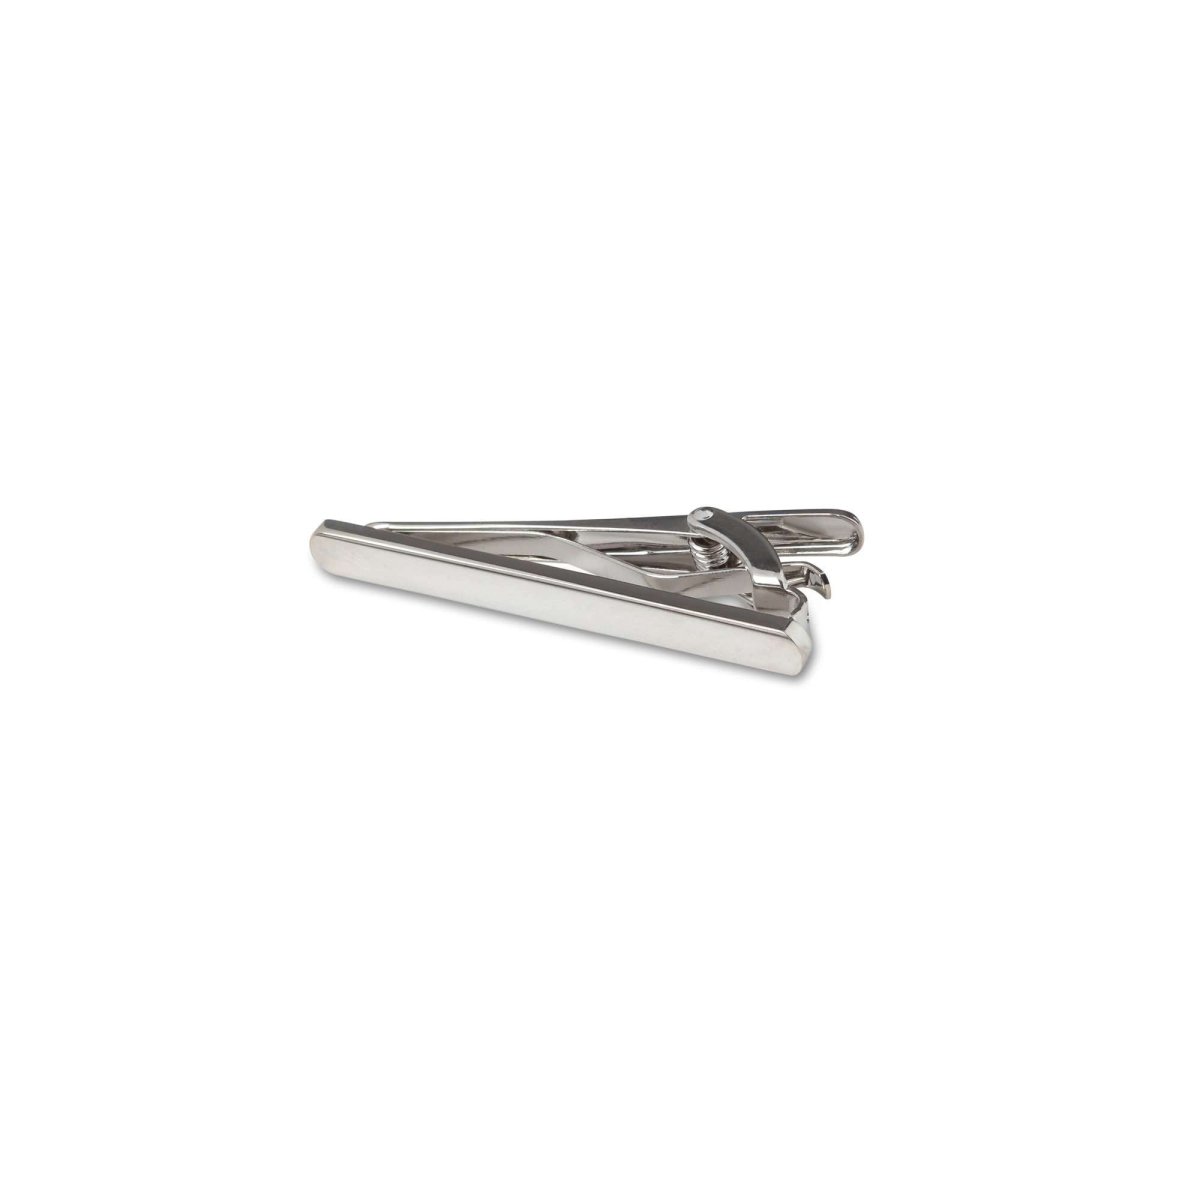 Silver Oval Tie Bar - MenSuits